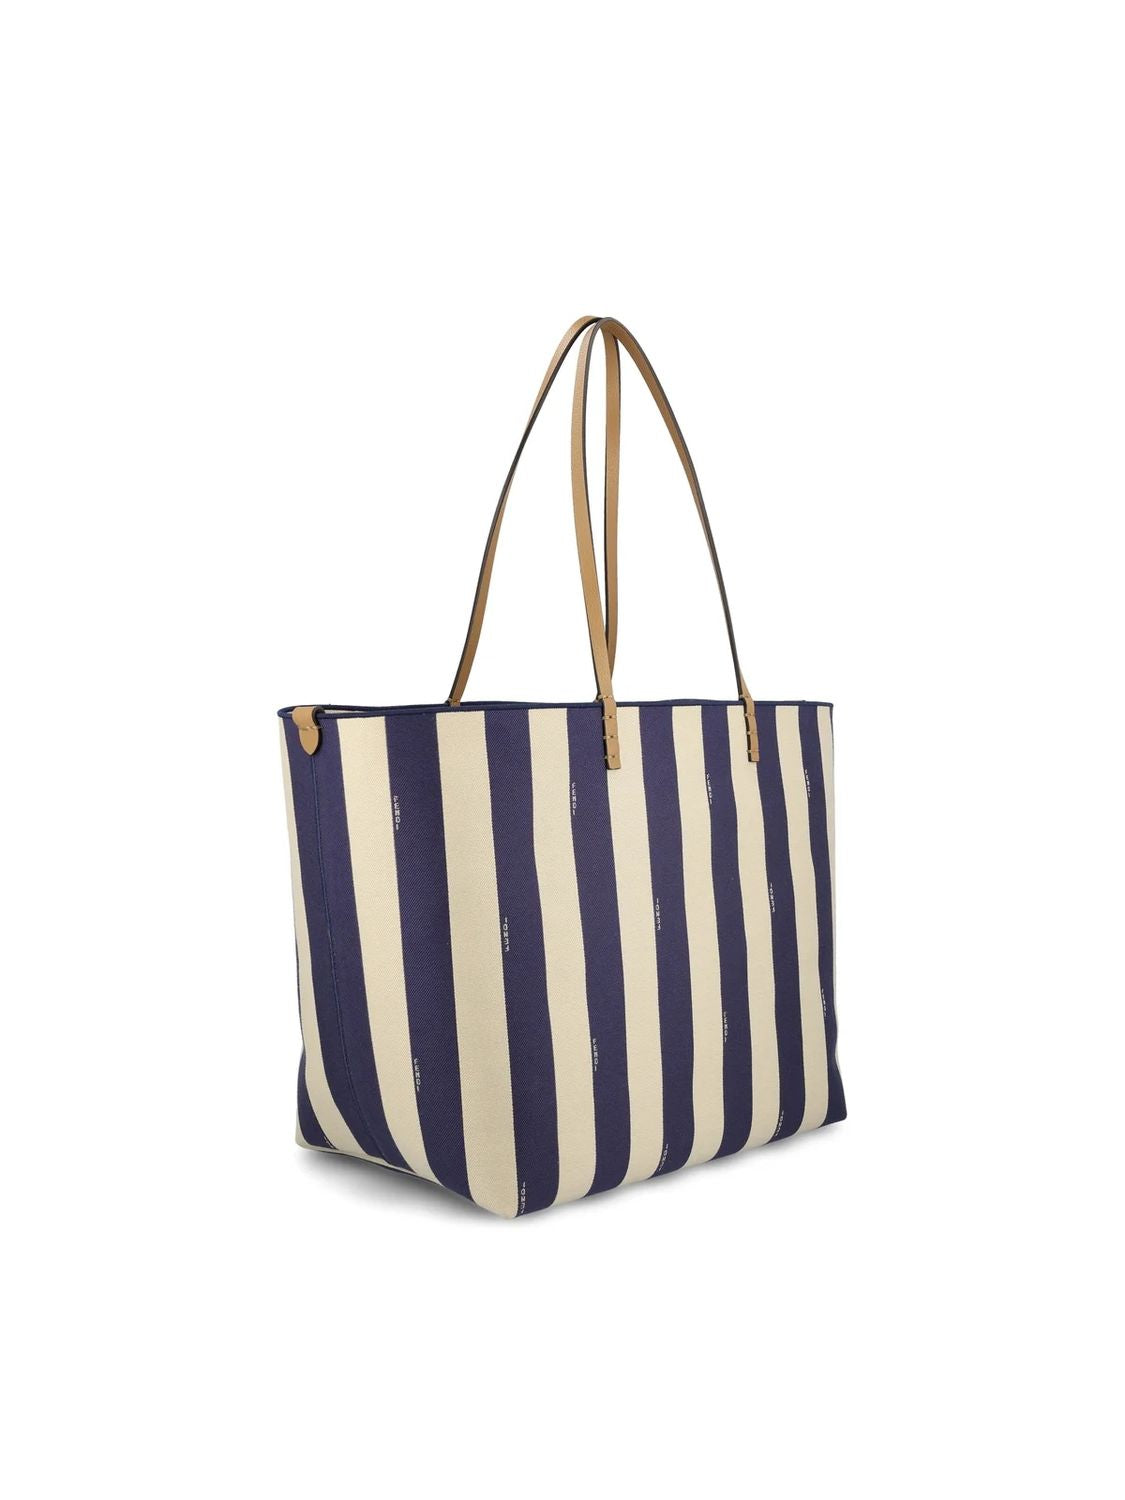 FENDI Reversible Large Striped Navy Jacquard Tote with Leather Accents and Gold-Tone Hardware